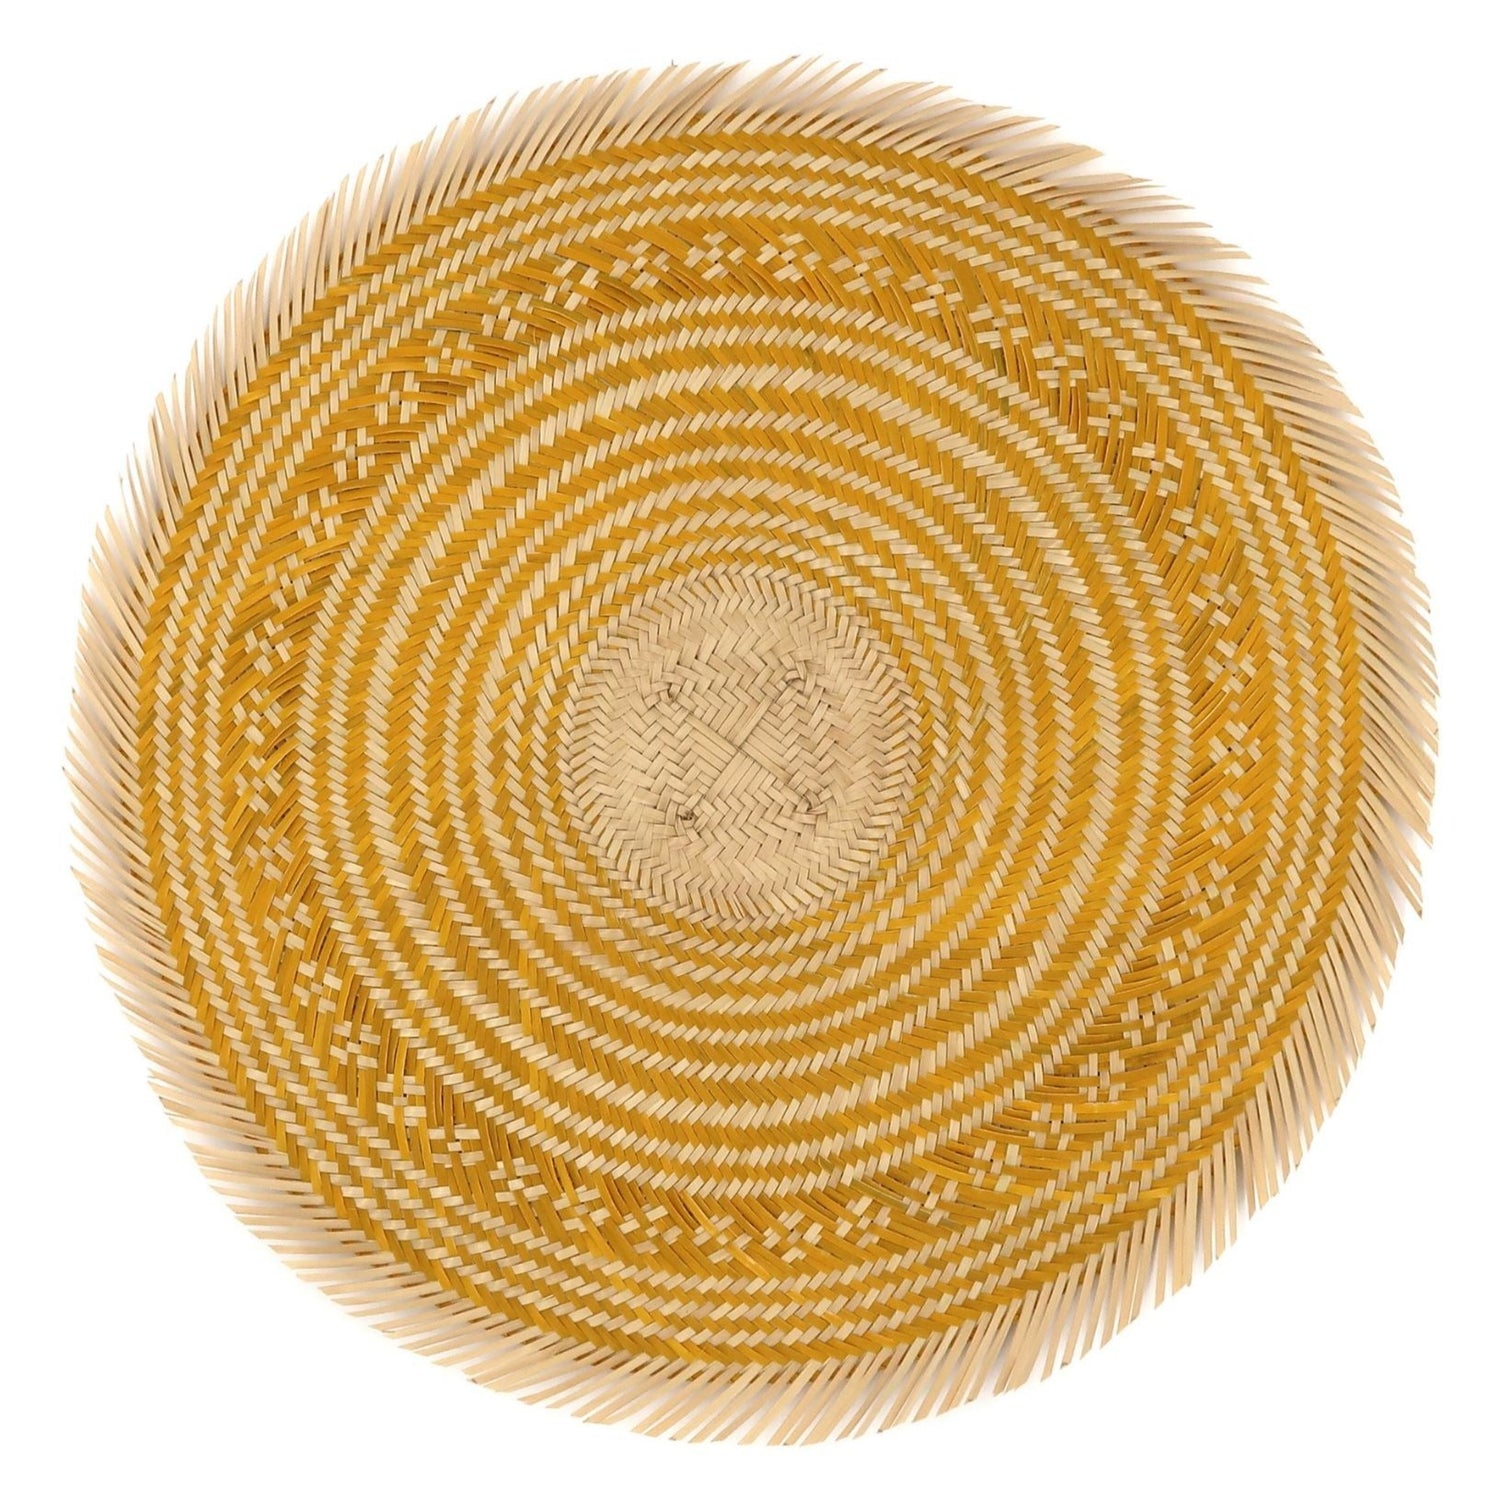 Woven Natural Straw Yellow Round Placemats with Trimmings Placemats WASHEIN 